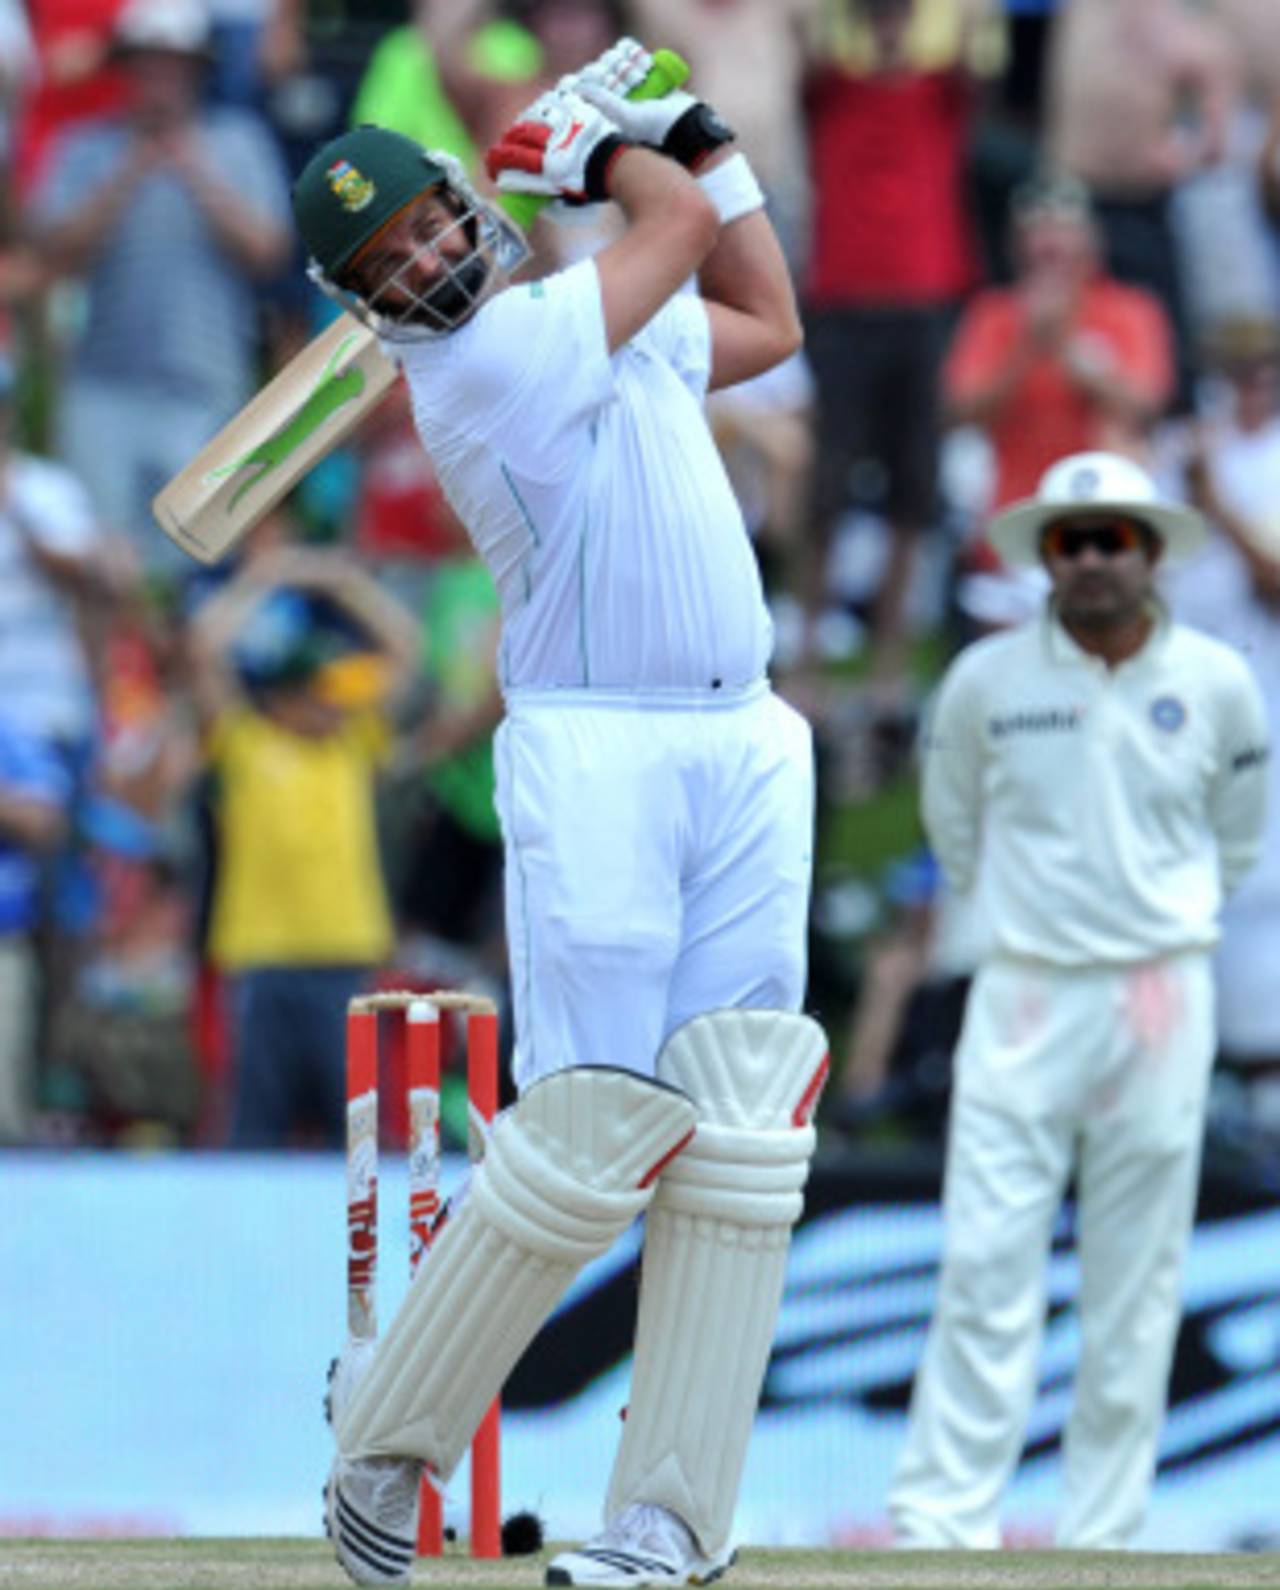 Jacques Kallis is ready to hit the golf course after getting his maiden Test double-century, South Africa v India, 1st Test, Centurion, 3rd day, December 18, 2010 